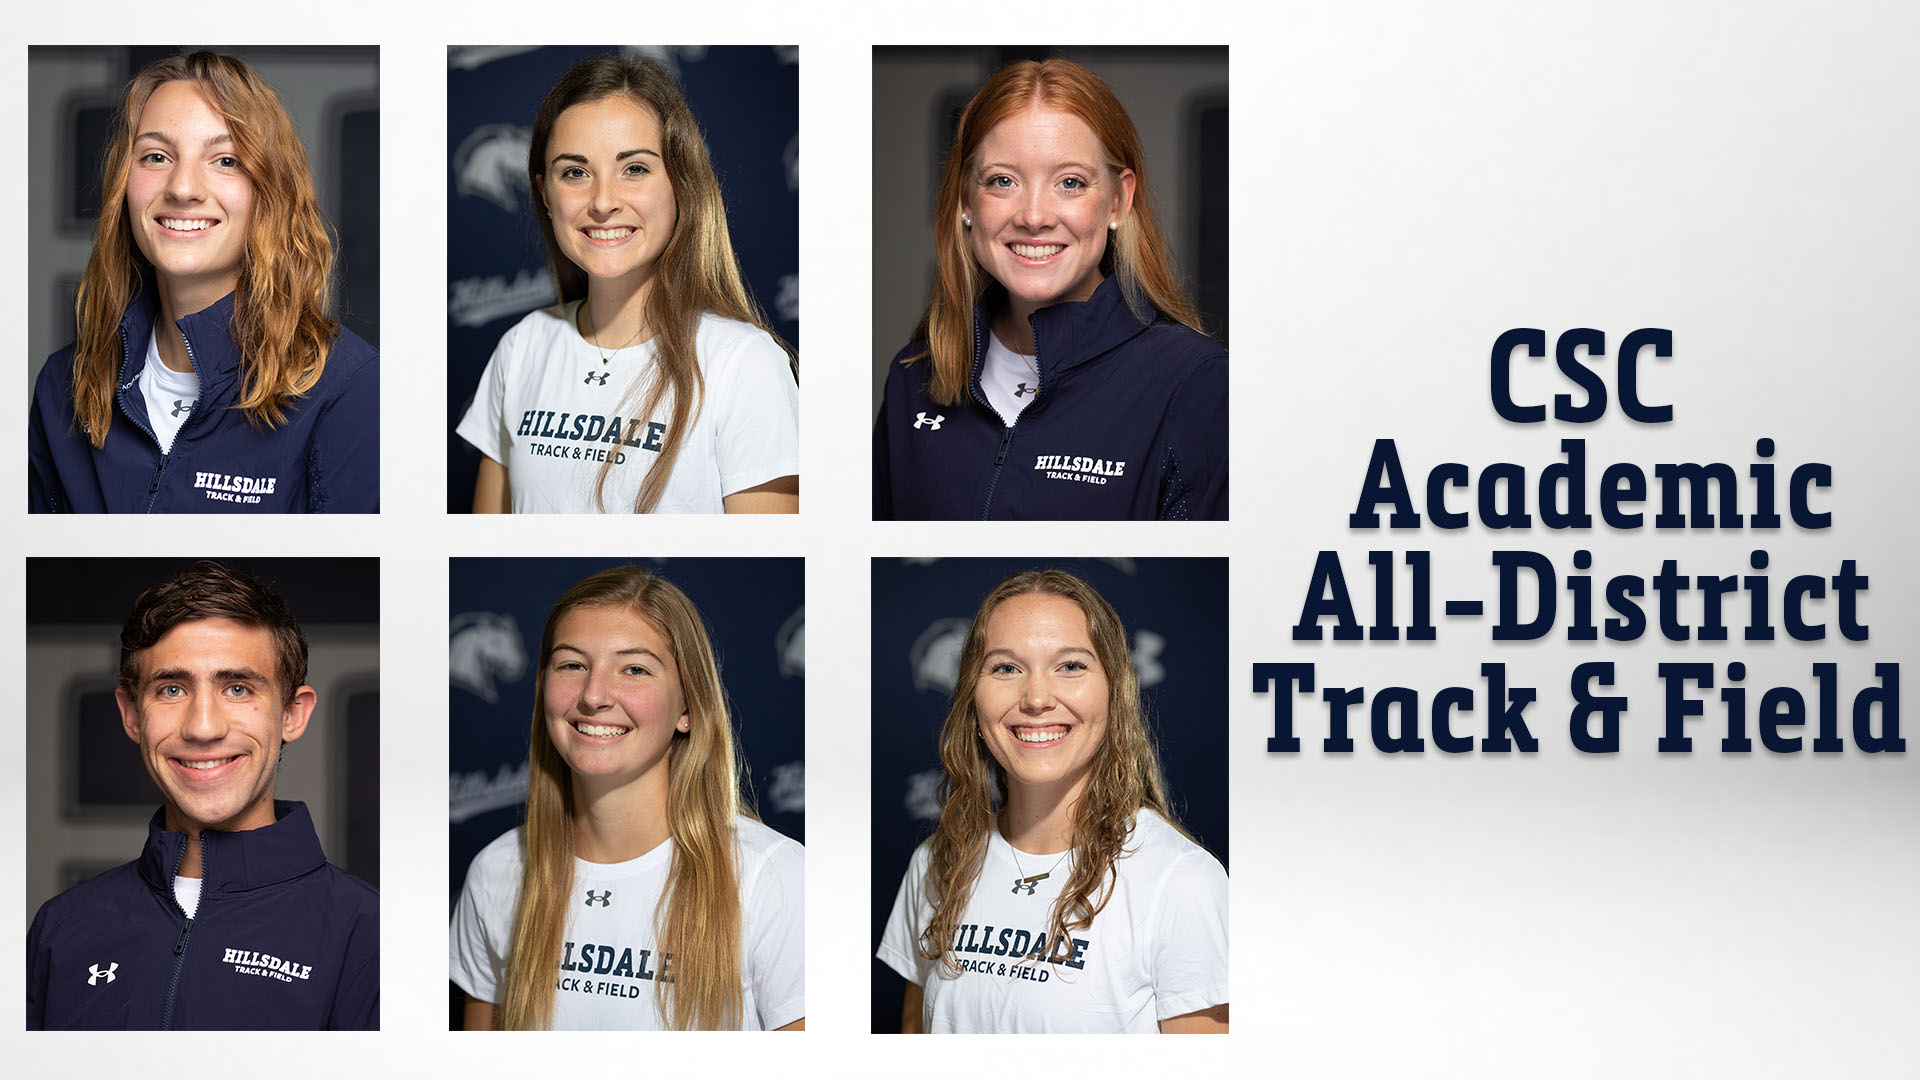 Six Hillsdale College track and field athletes earn CSC Academic All-District honors